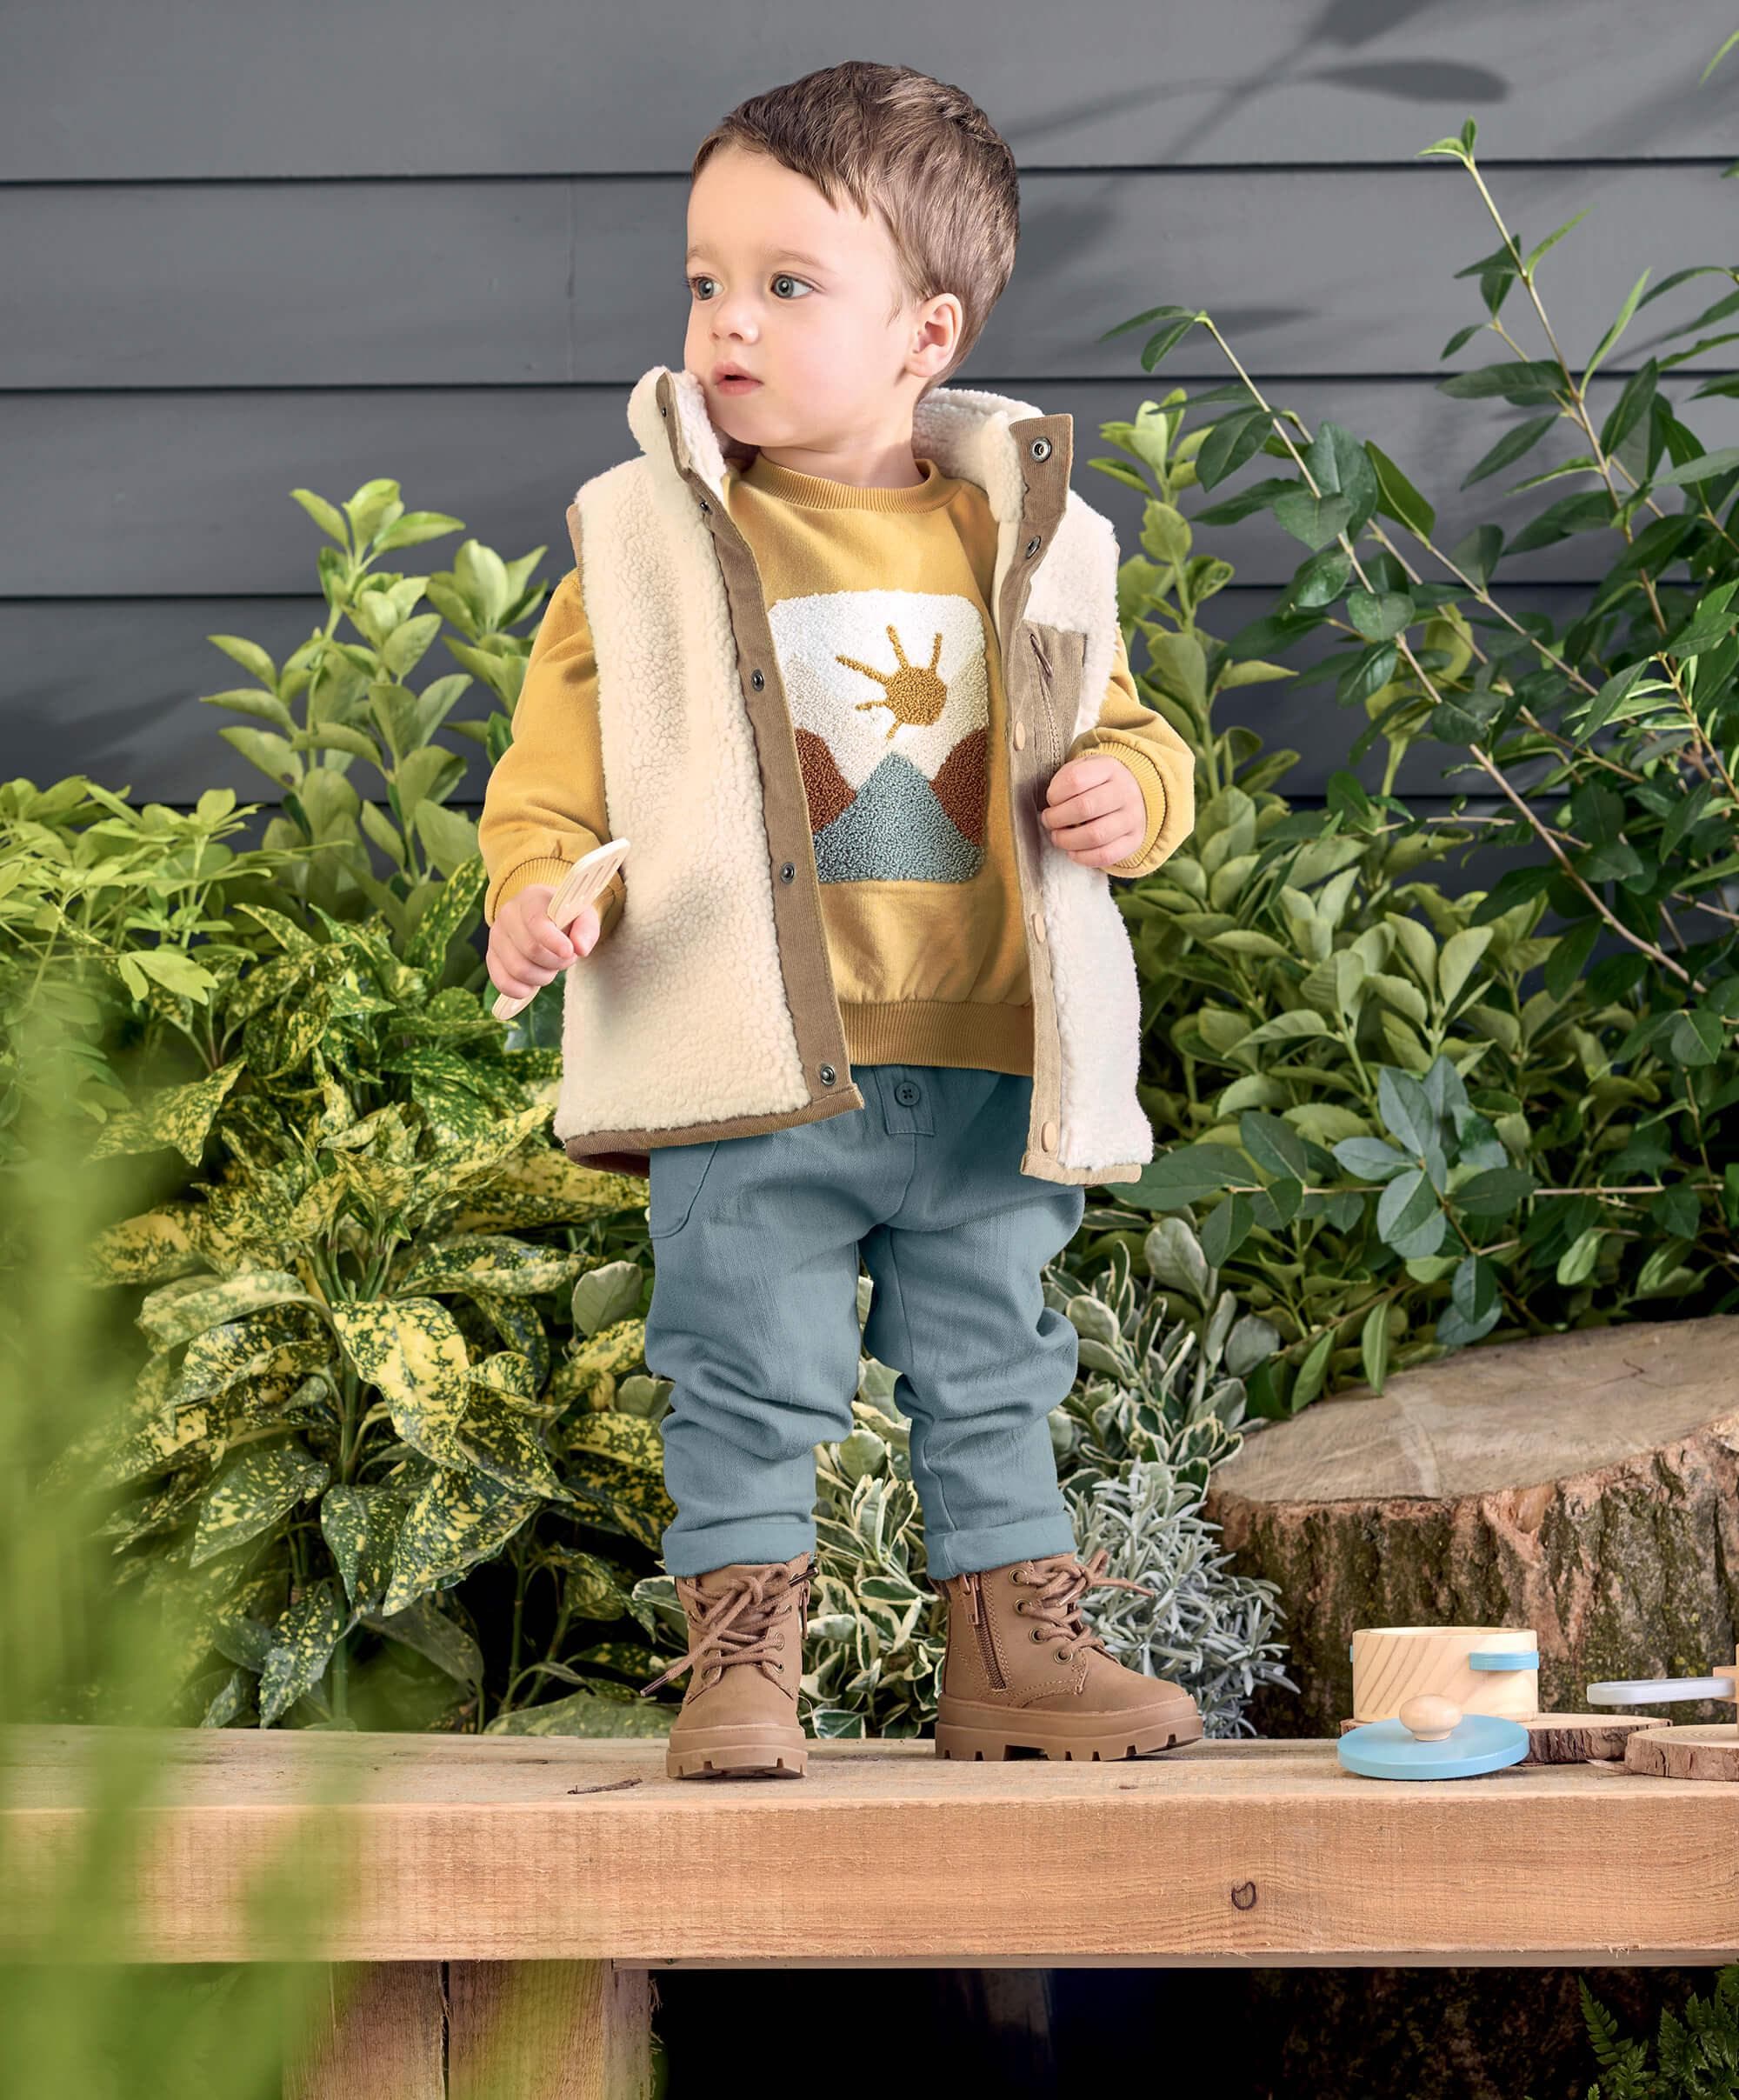 Amazon.com: Baby Clothes Boy 6-9 Months Infant Fall Winter Outfits Long  Sleeve Bear Sweatshirts Tops+Pants Set, Yellow Bear Boy Outfit 6-9 Months:  Clothing, Shoes & Jewelry